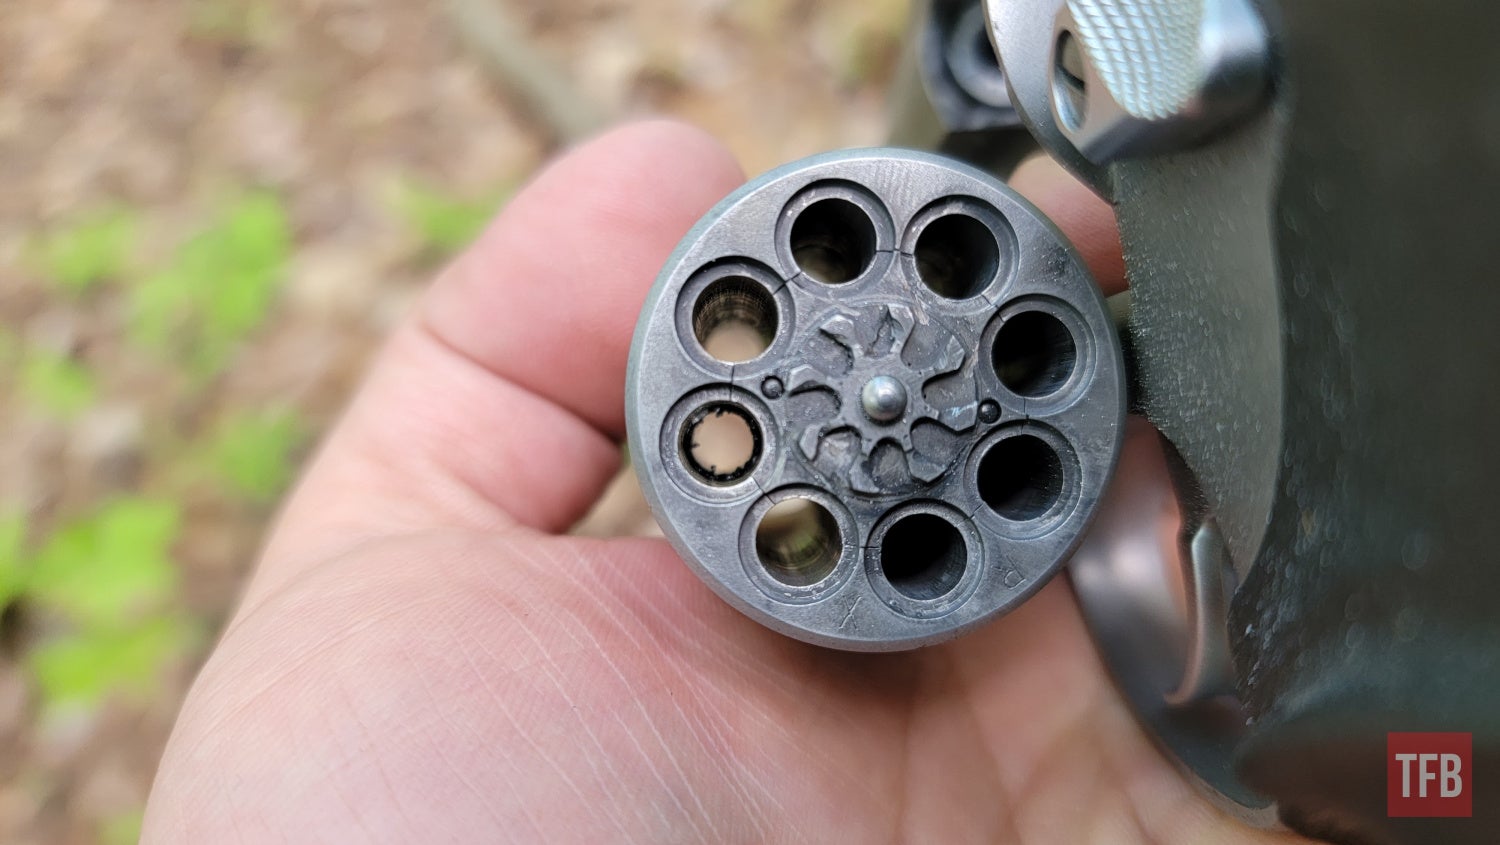 The Rimfire Report: Ammo For The Apocalypse - Nail Blanks and 22 Pellets